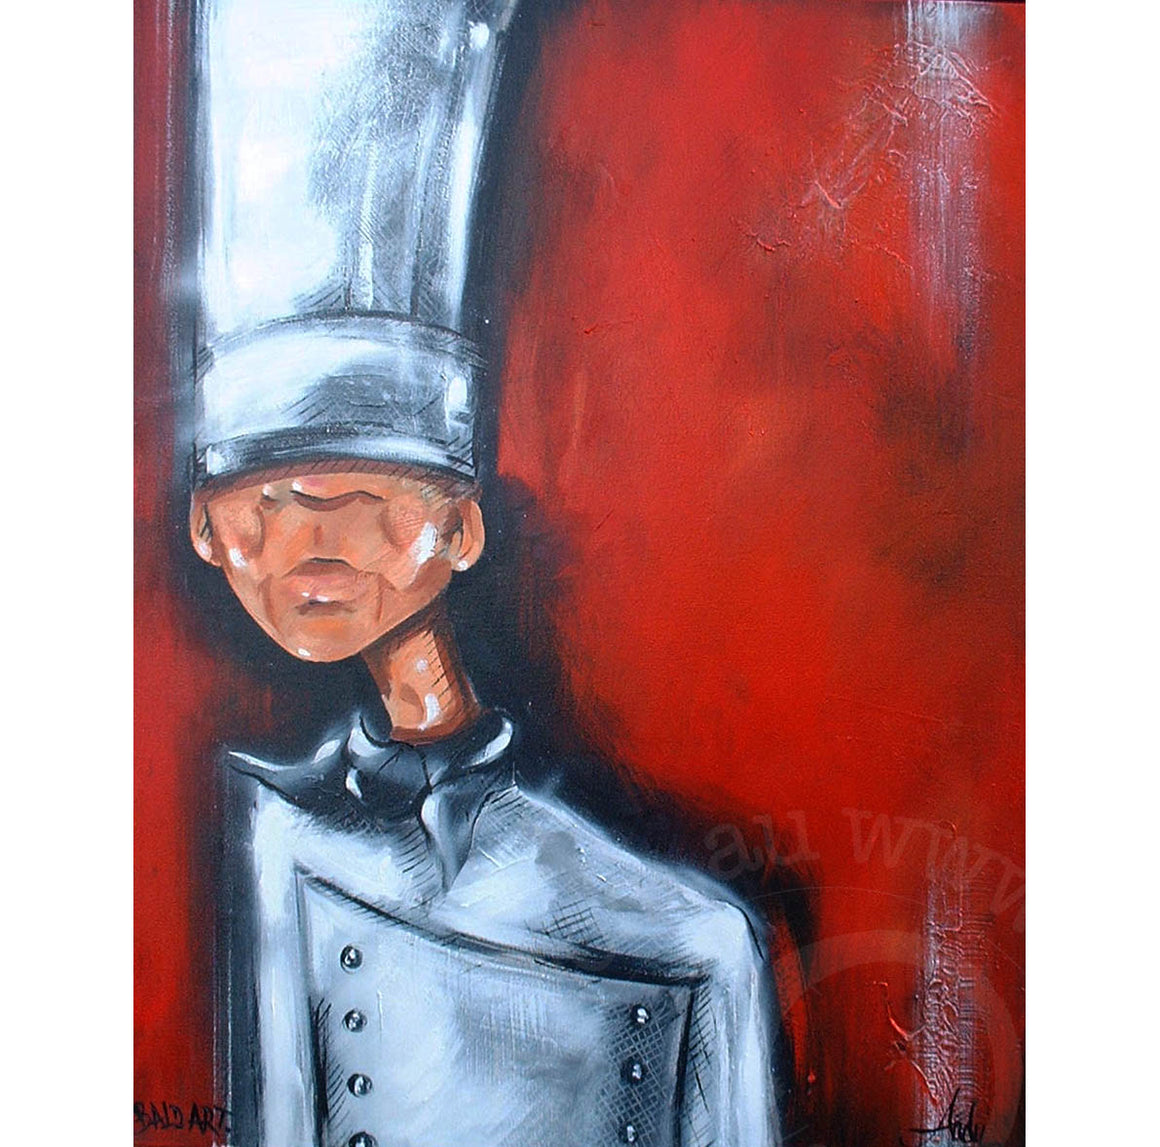 chef artwork by andy baker of bald art limited edition canvas print